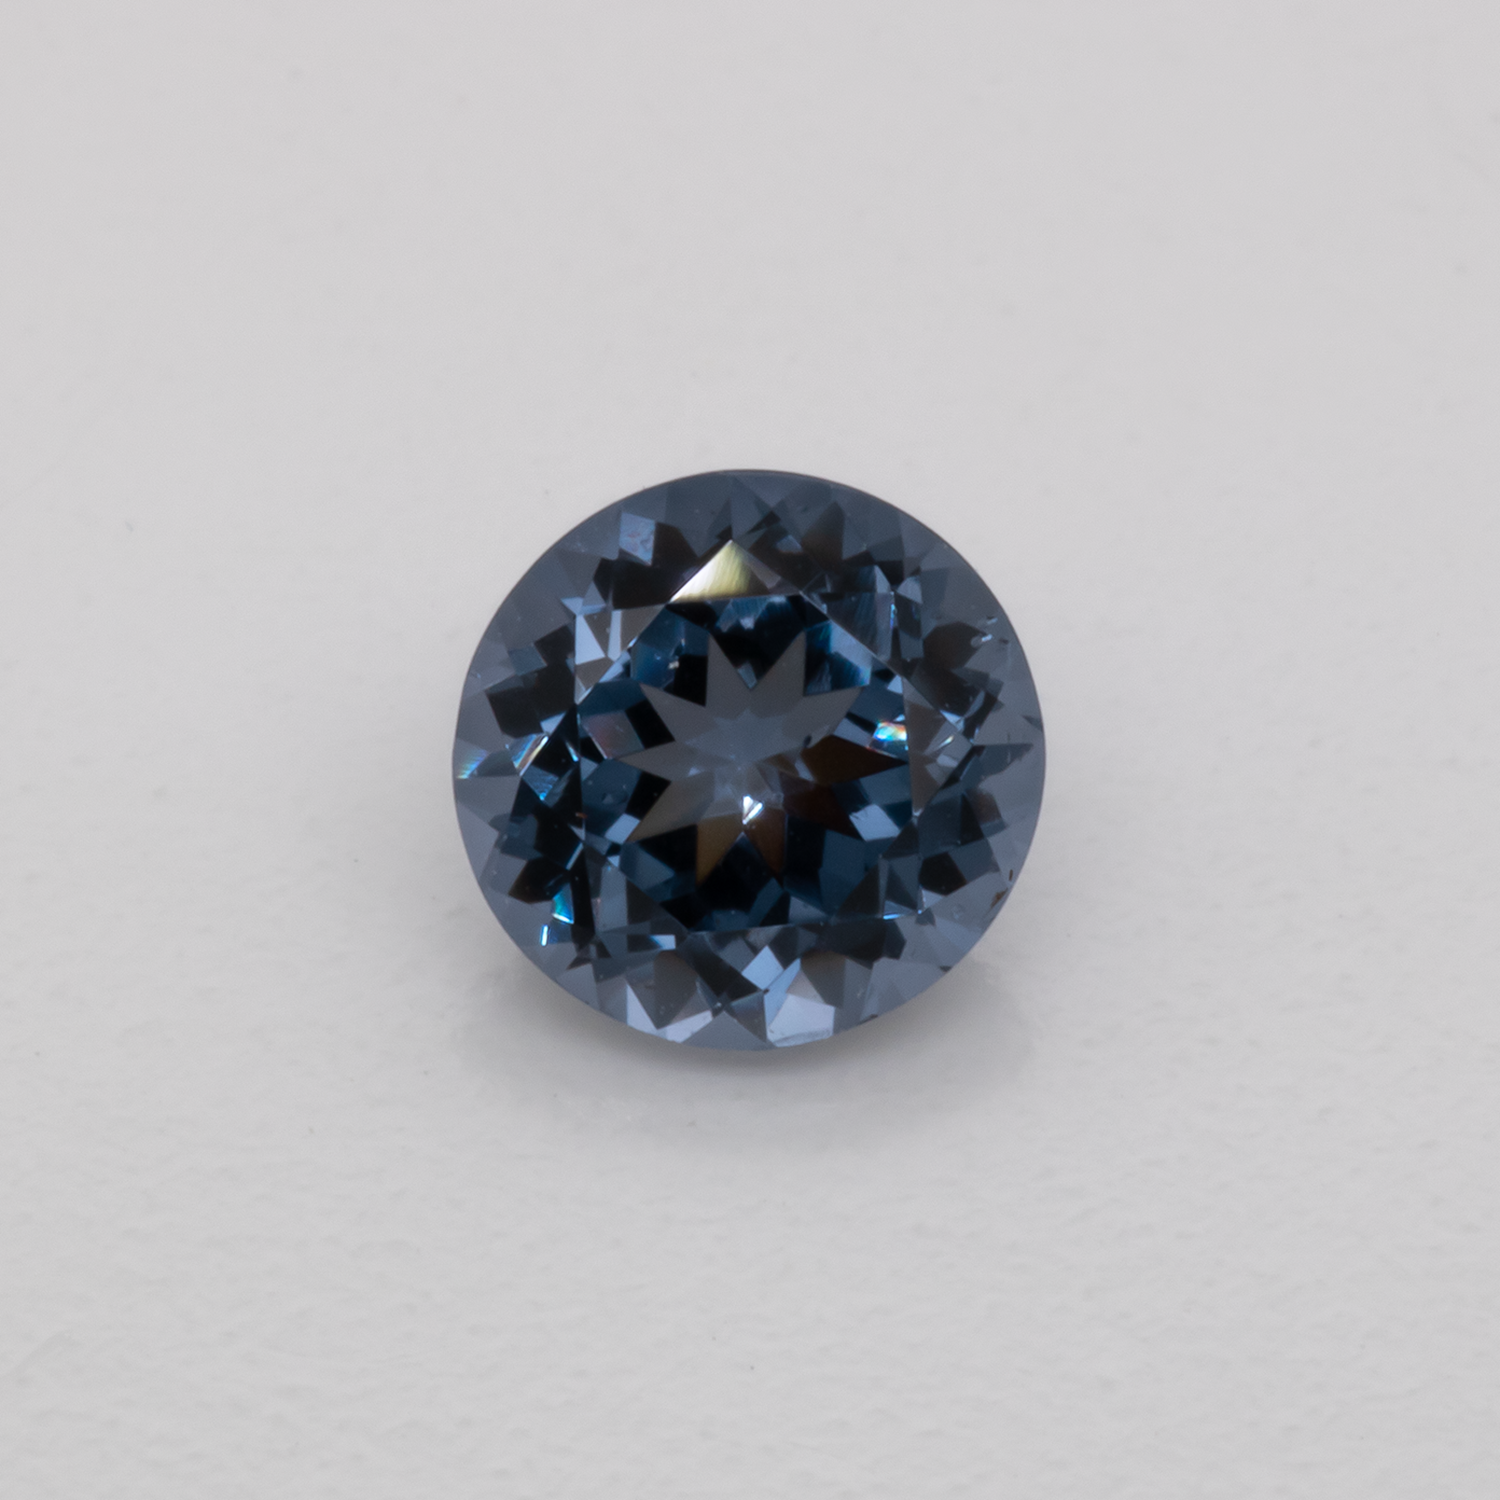 Spinel - blue, round, 5x5 mm, 0.54 cts, No. SP90006